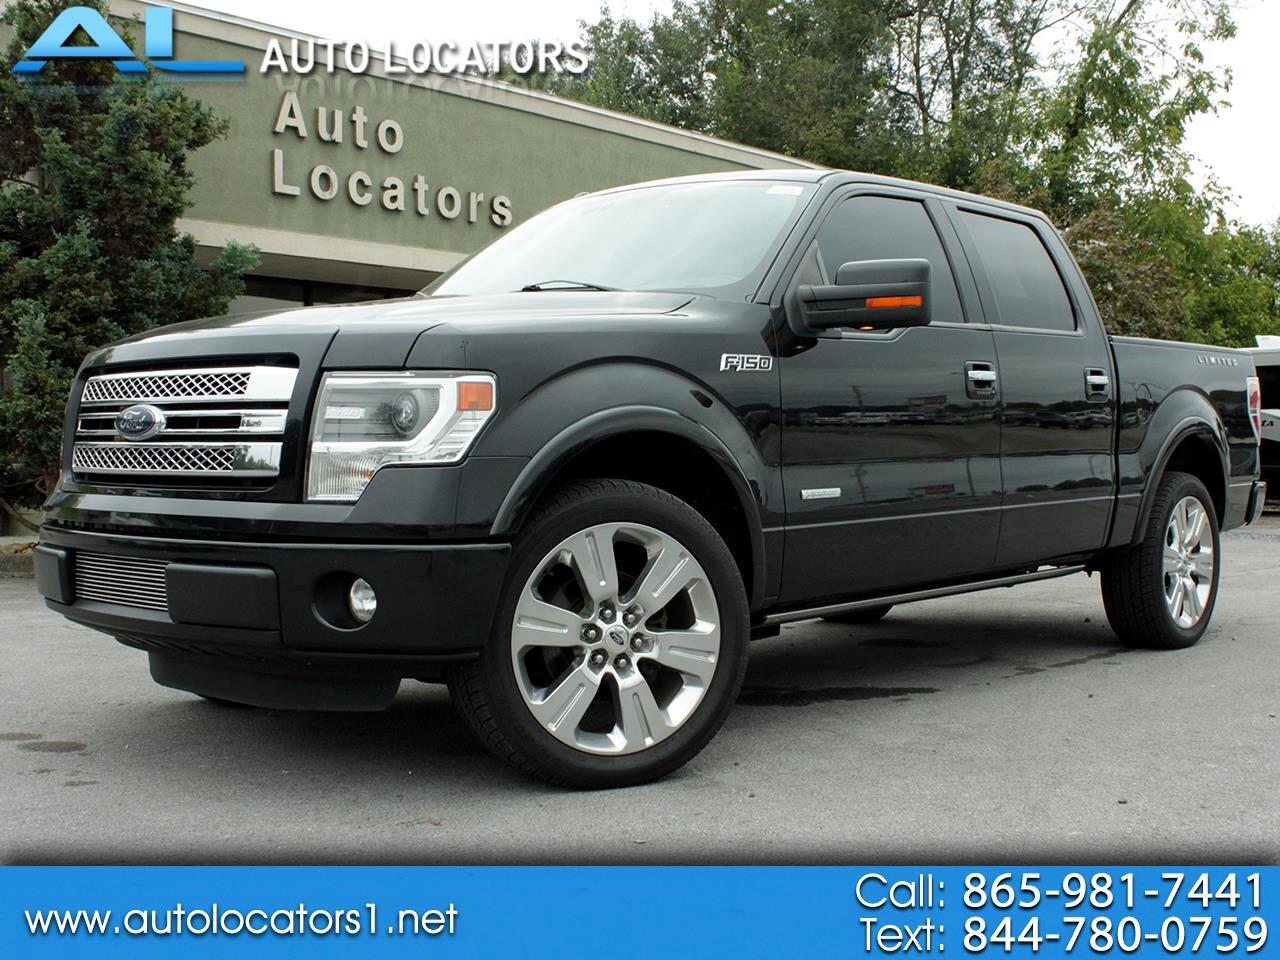 Ford F-150 2WD SuperCrew 145" Limited 2014